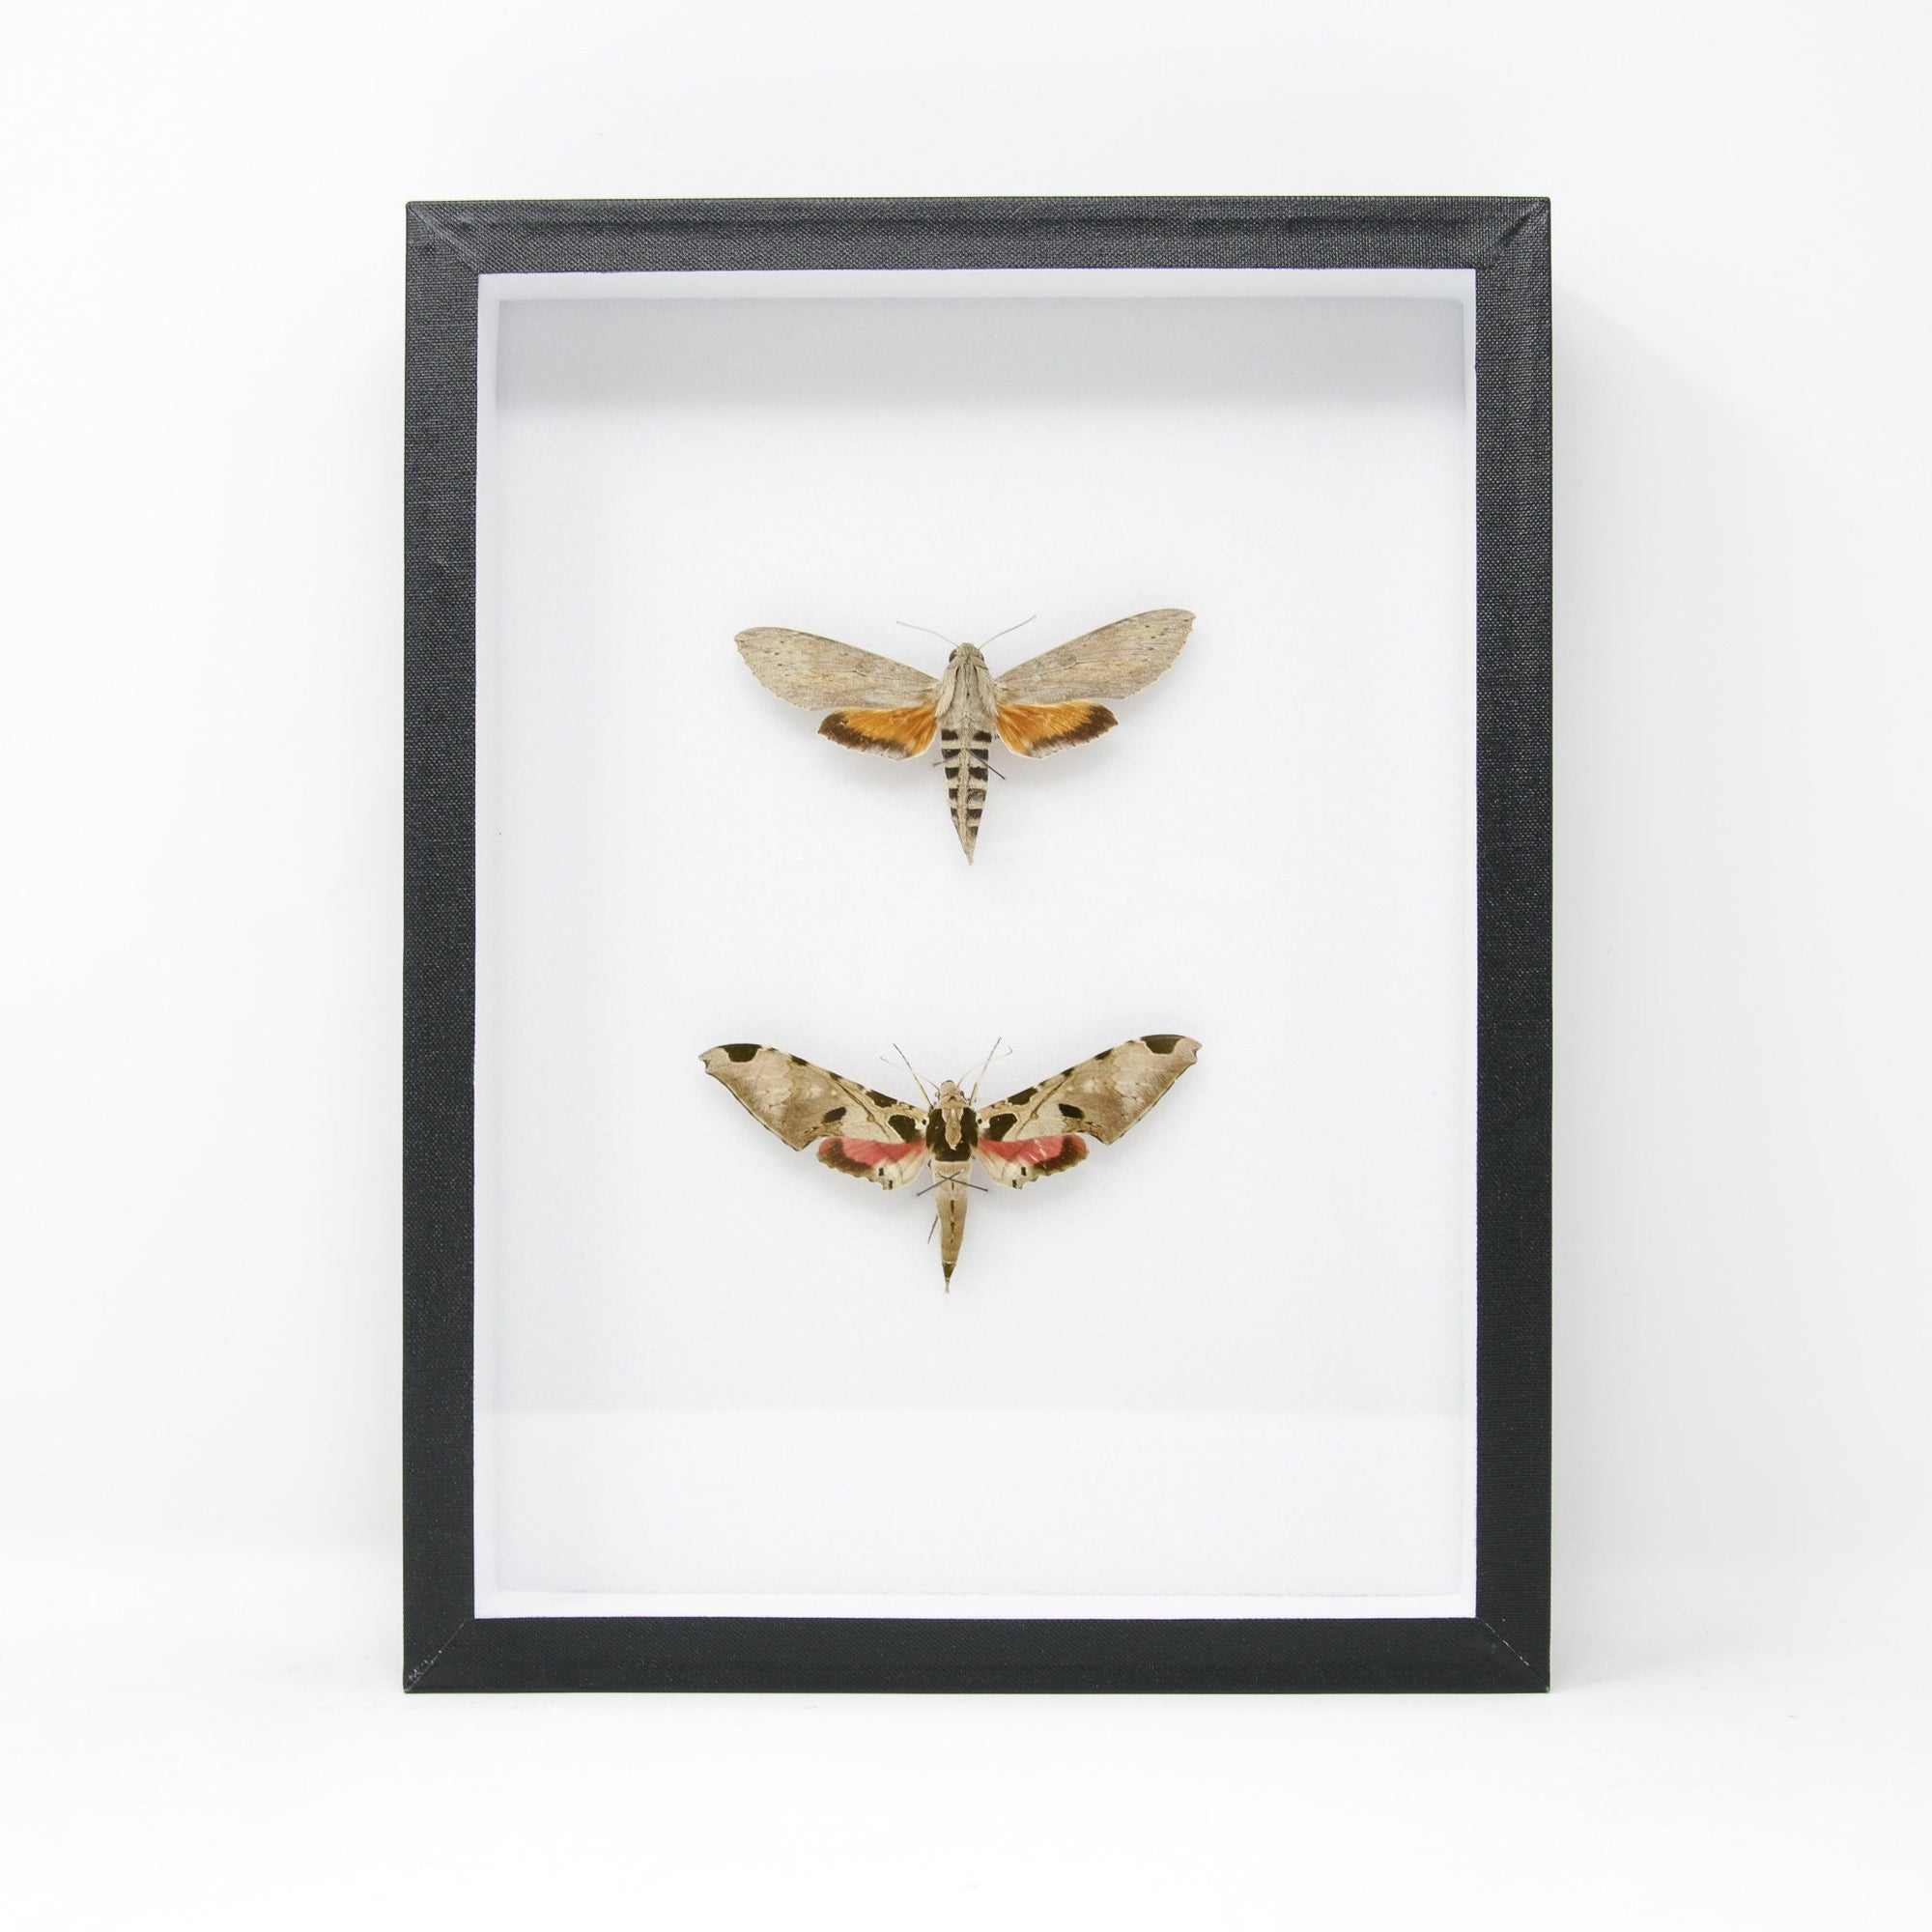 Hawkmoth Taxidermy Specimens | Pinned Lepidoptera with Scientific Collection Data, Entomology Box Frame | 12x9x2 inch